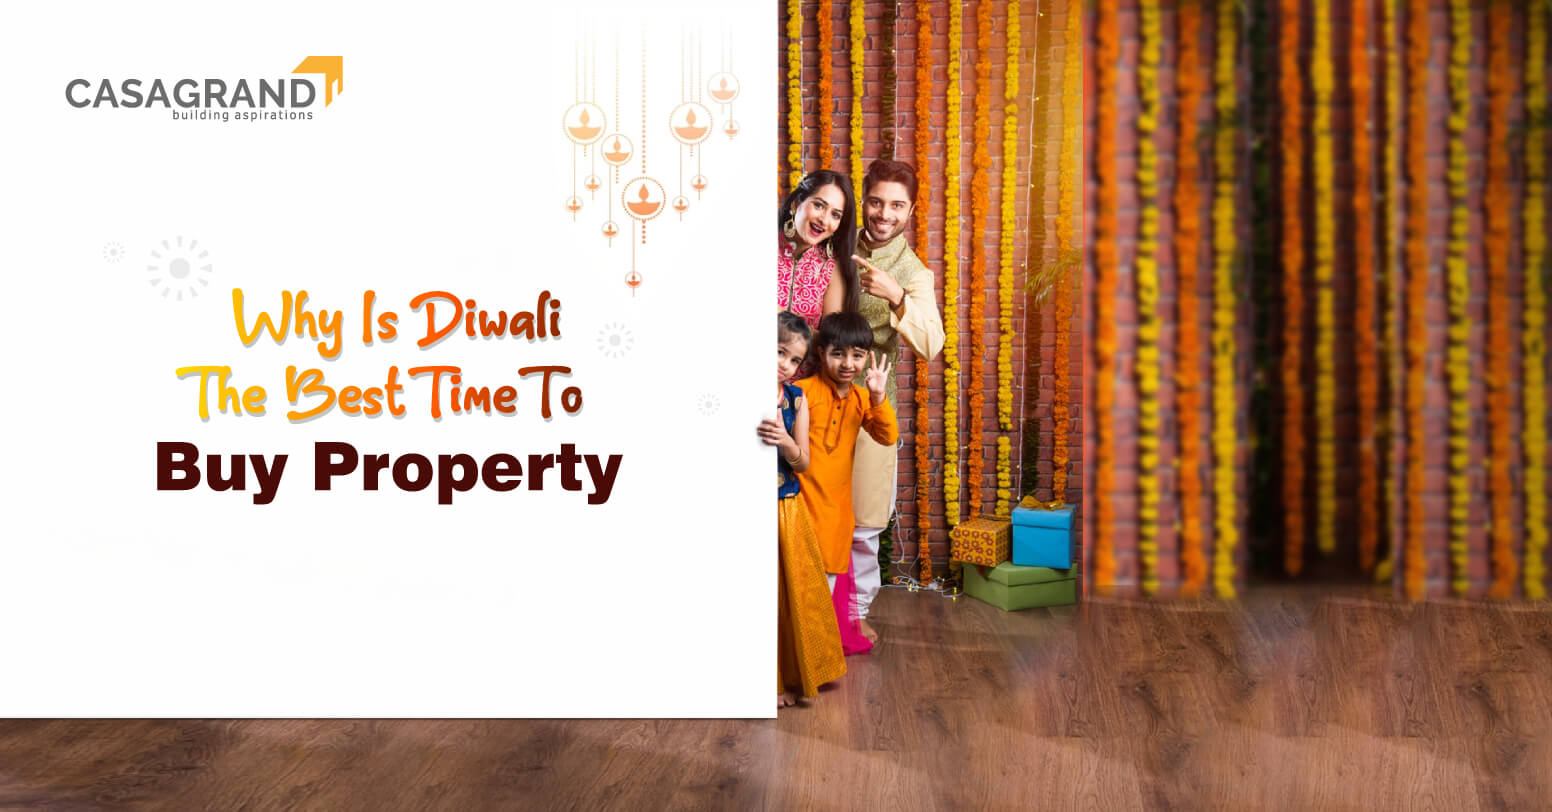 Why Is Diwali The Best Time To Buy Property